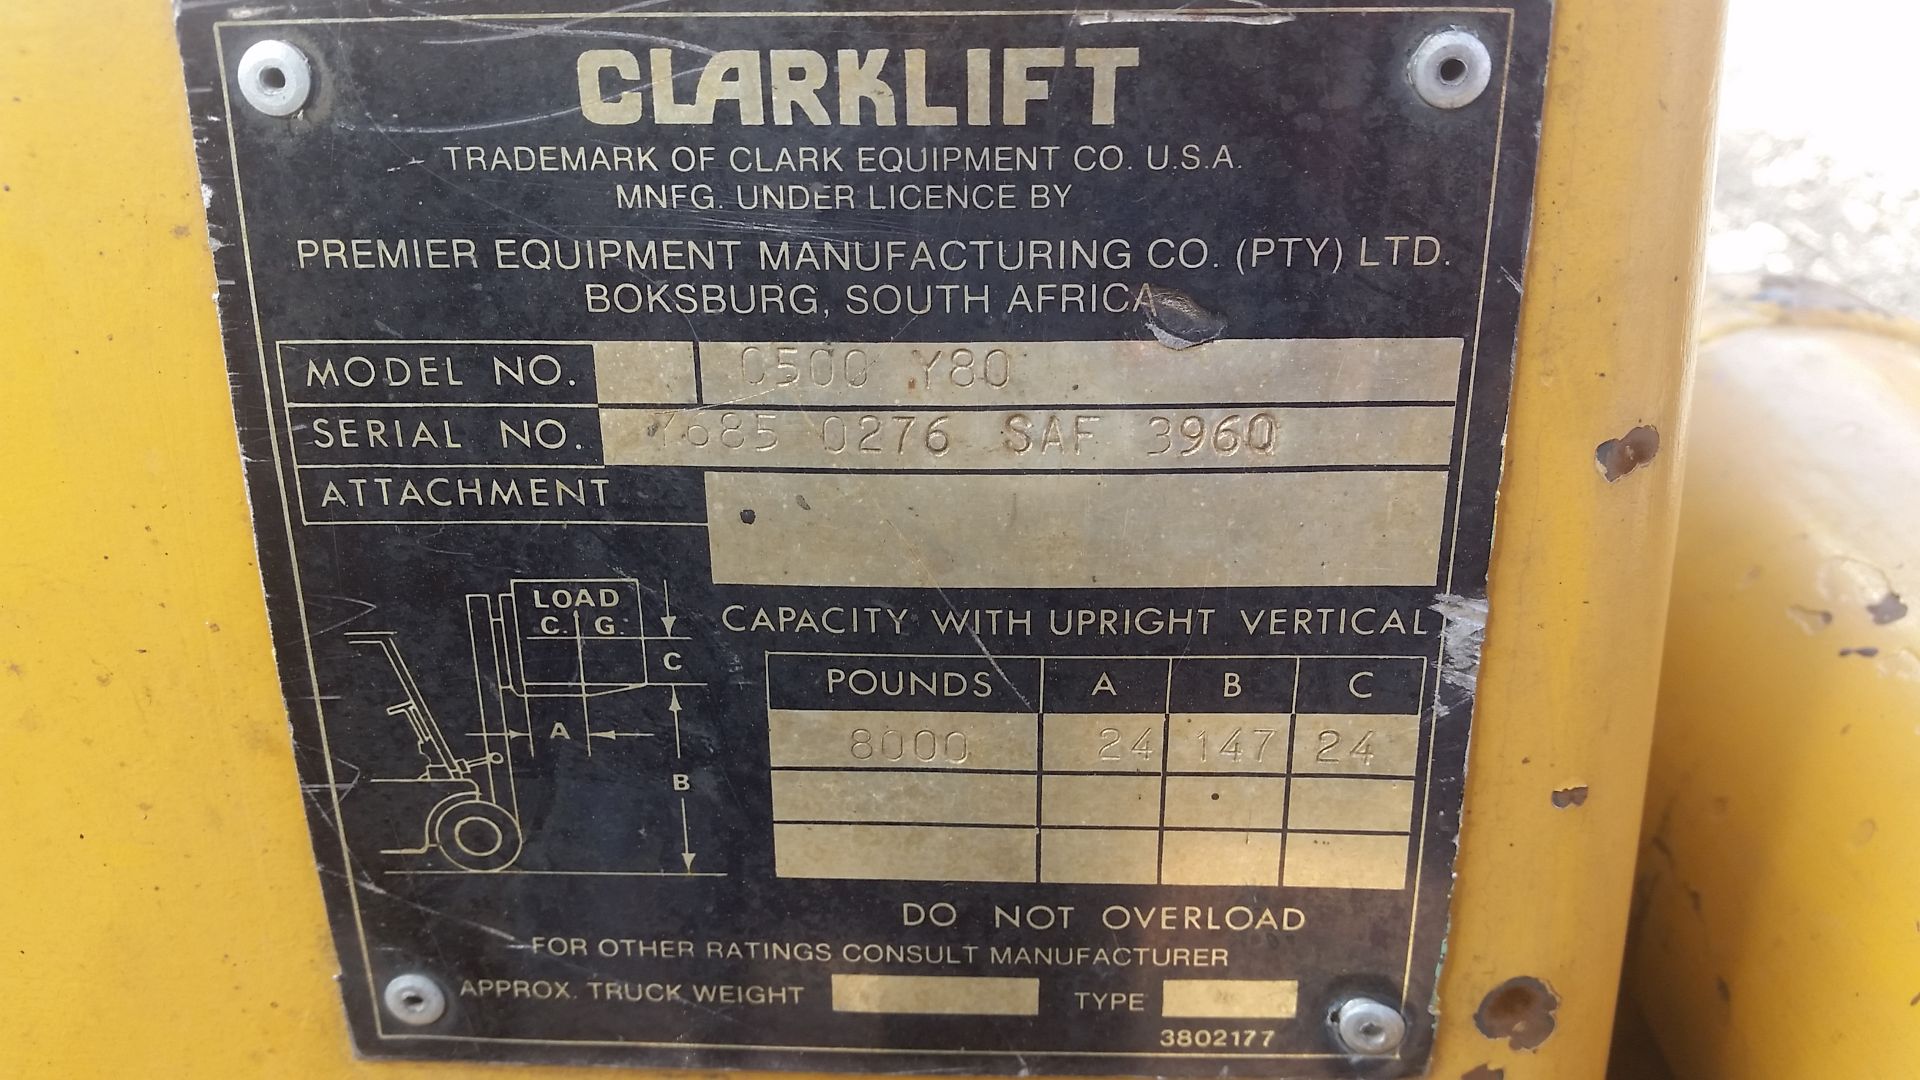 Clarklift Forklift model 0500 Y80 Capacity with upright vertical 8000 pounds - Image 5 of 5